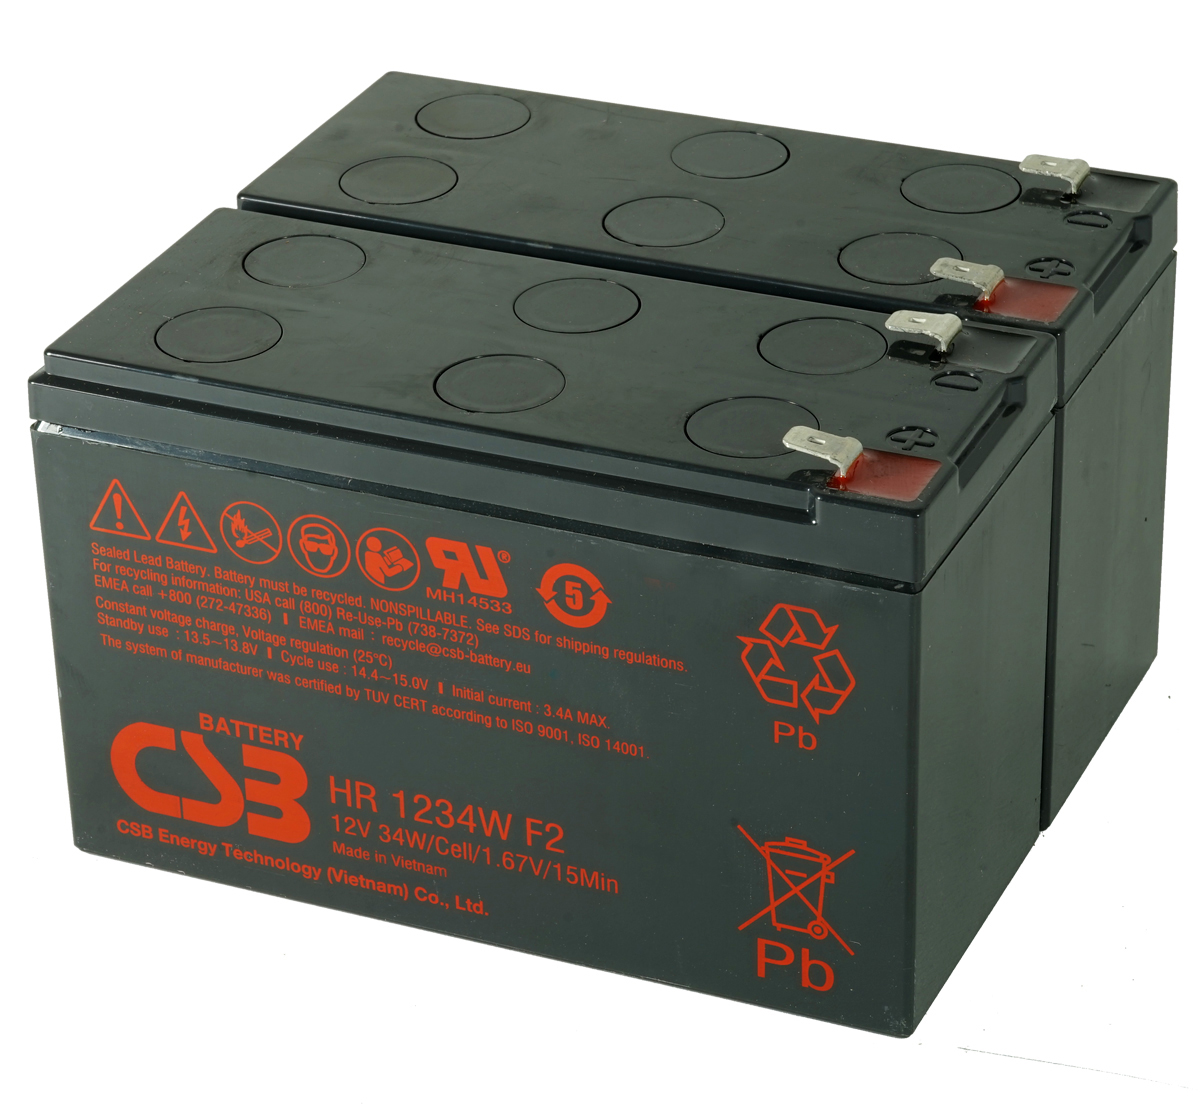 MDS1007 UPS Battery Kit for MGE AB1007